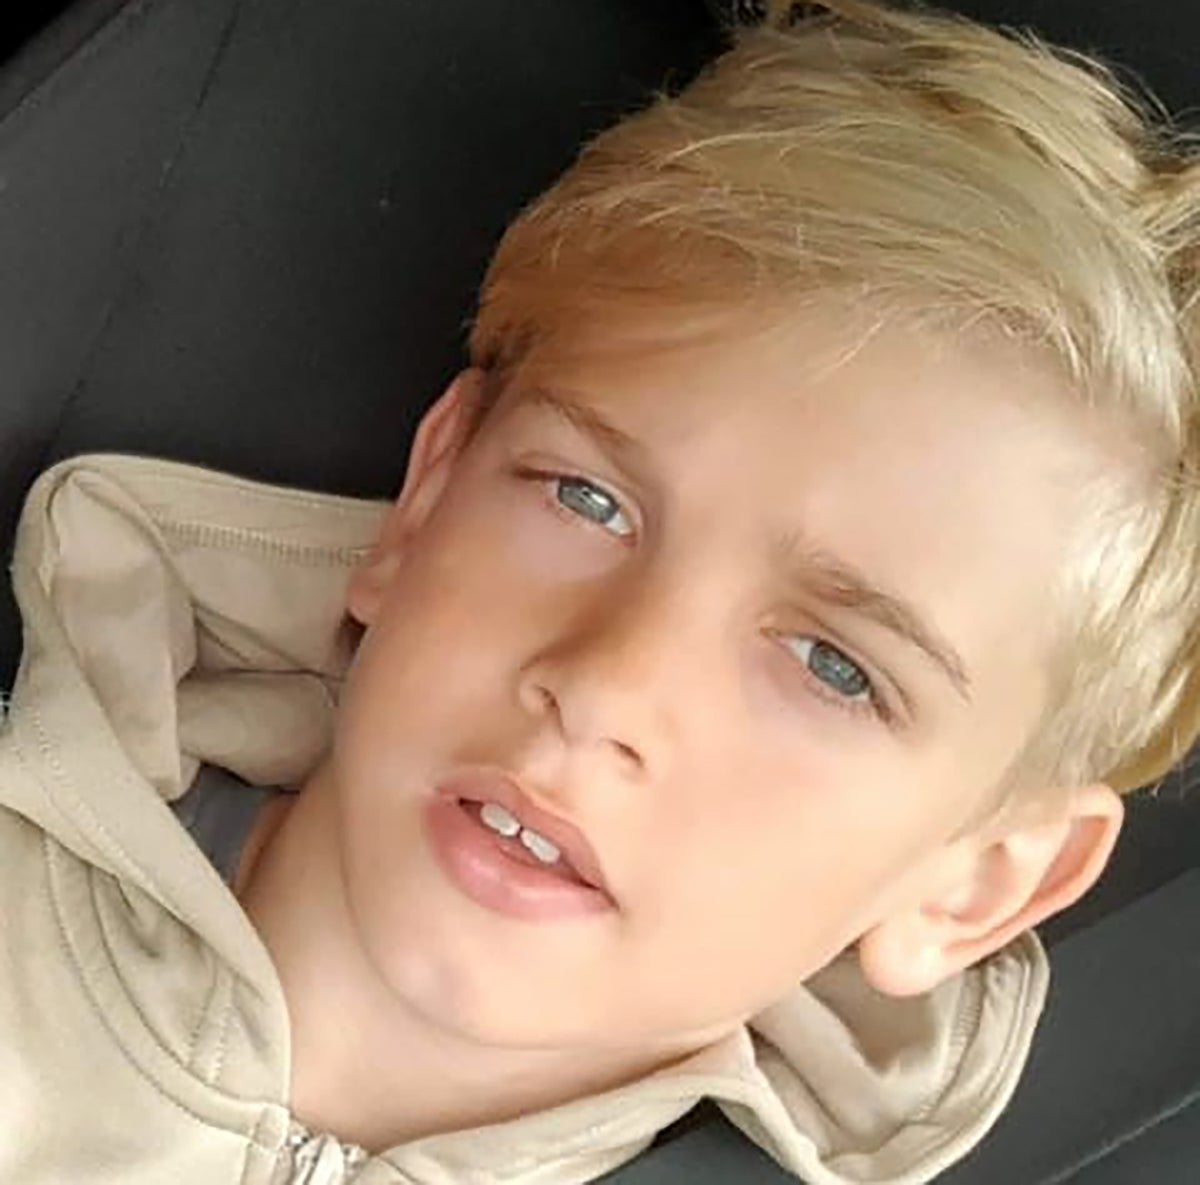 Archie Battersbee: Brain-damaged boy, 12, should be taken off life support, High Court rules